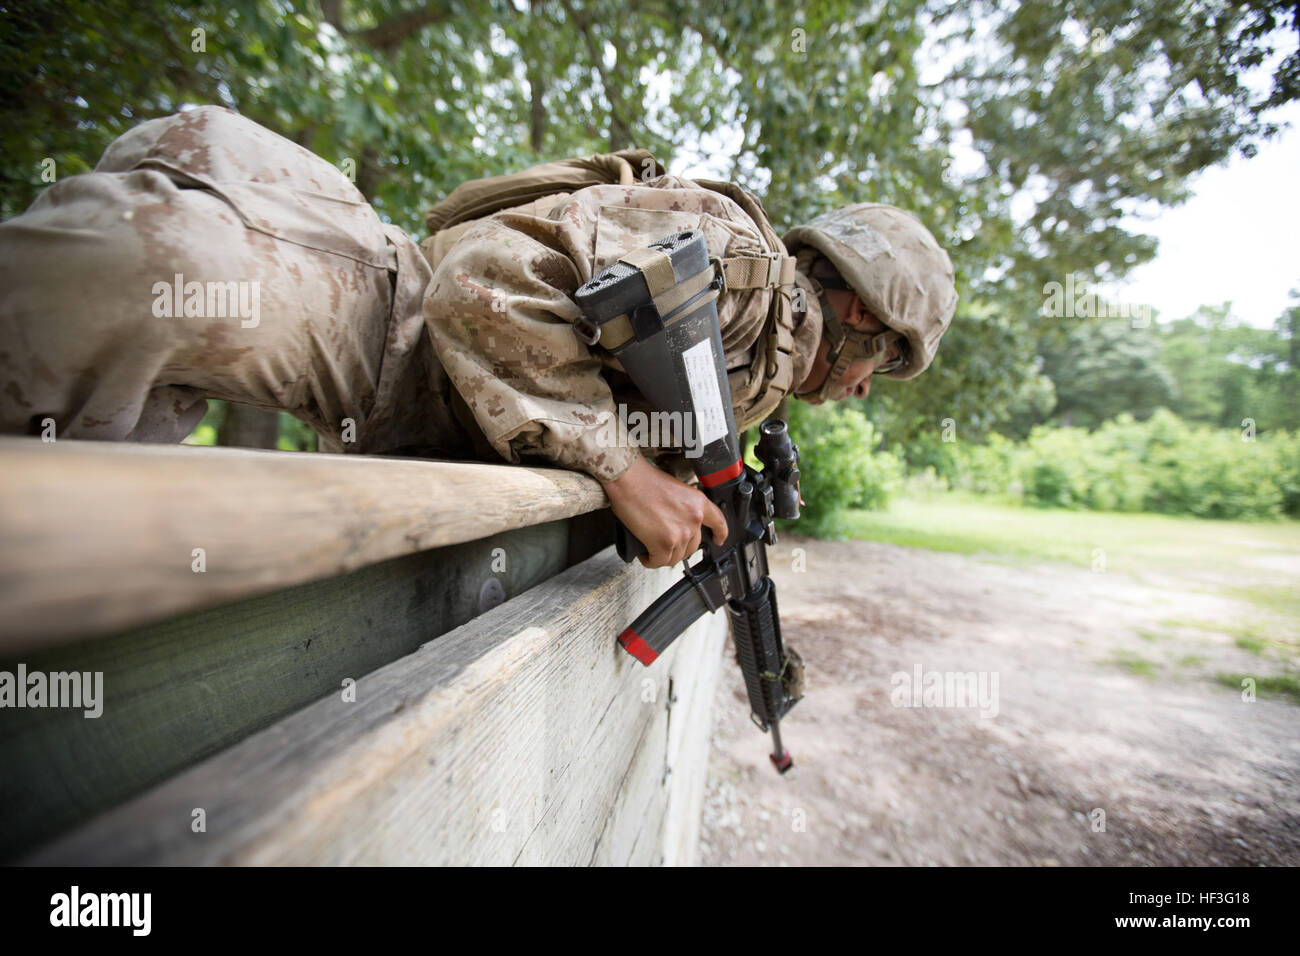 U.S. Marine Corps Pfc. Rafael J. Cubano, an entry-level Marine with Fox Company, Marine Combat Training Battalion (MCT), climbs over a wall while conduct a Military Operations on Urban Terrain drill during their Battle Skills Readiness Exercise (BSRE) on Camp Devil Dog, N.C., July 8, 2015. The BSRE is the culminating event consisting of a 24 hour evolution testing all the tactical skills learned during MCT. (U.S. Marine Corps photo by SOI-East Combat Camera, Cpl. Andrew Kuppers/Released) MCT Marines Conduct Final Field Exercise 150708-M-NT768-014 Stock Photo